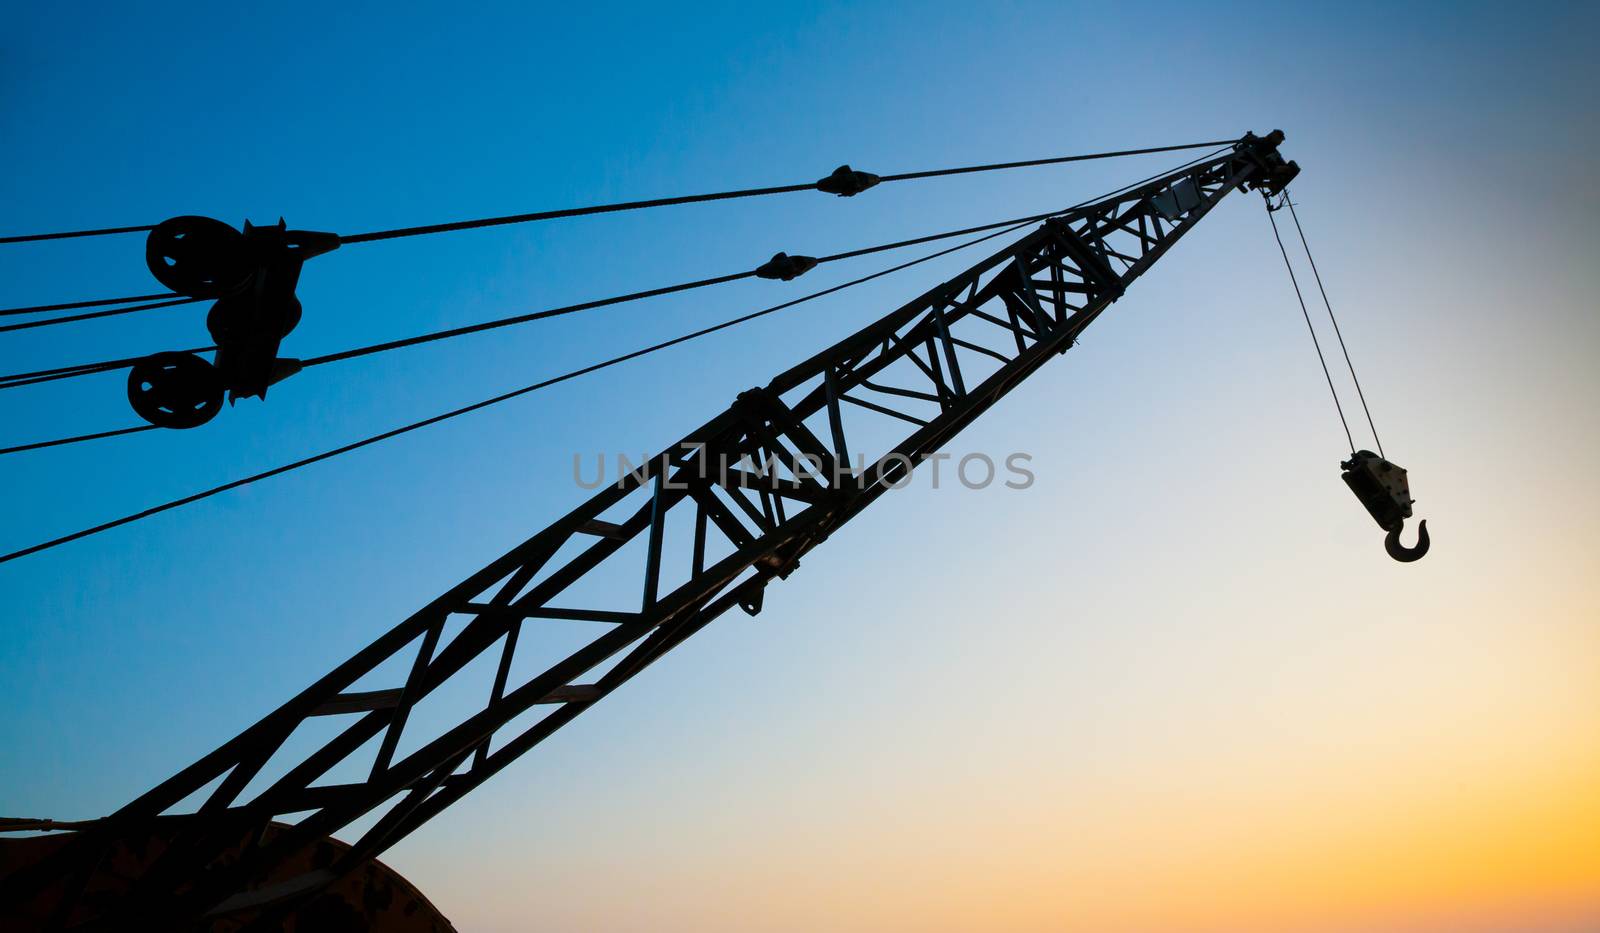 Crane Arm at Sunset with Colorful Sky.